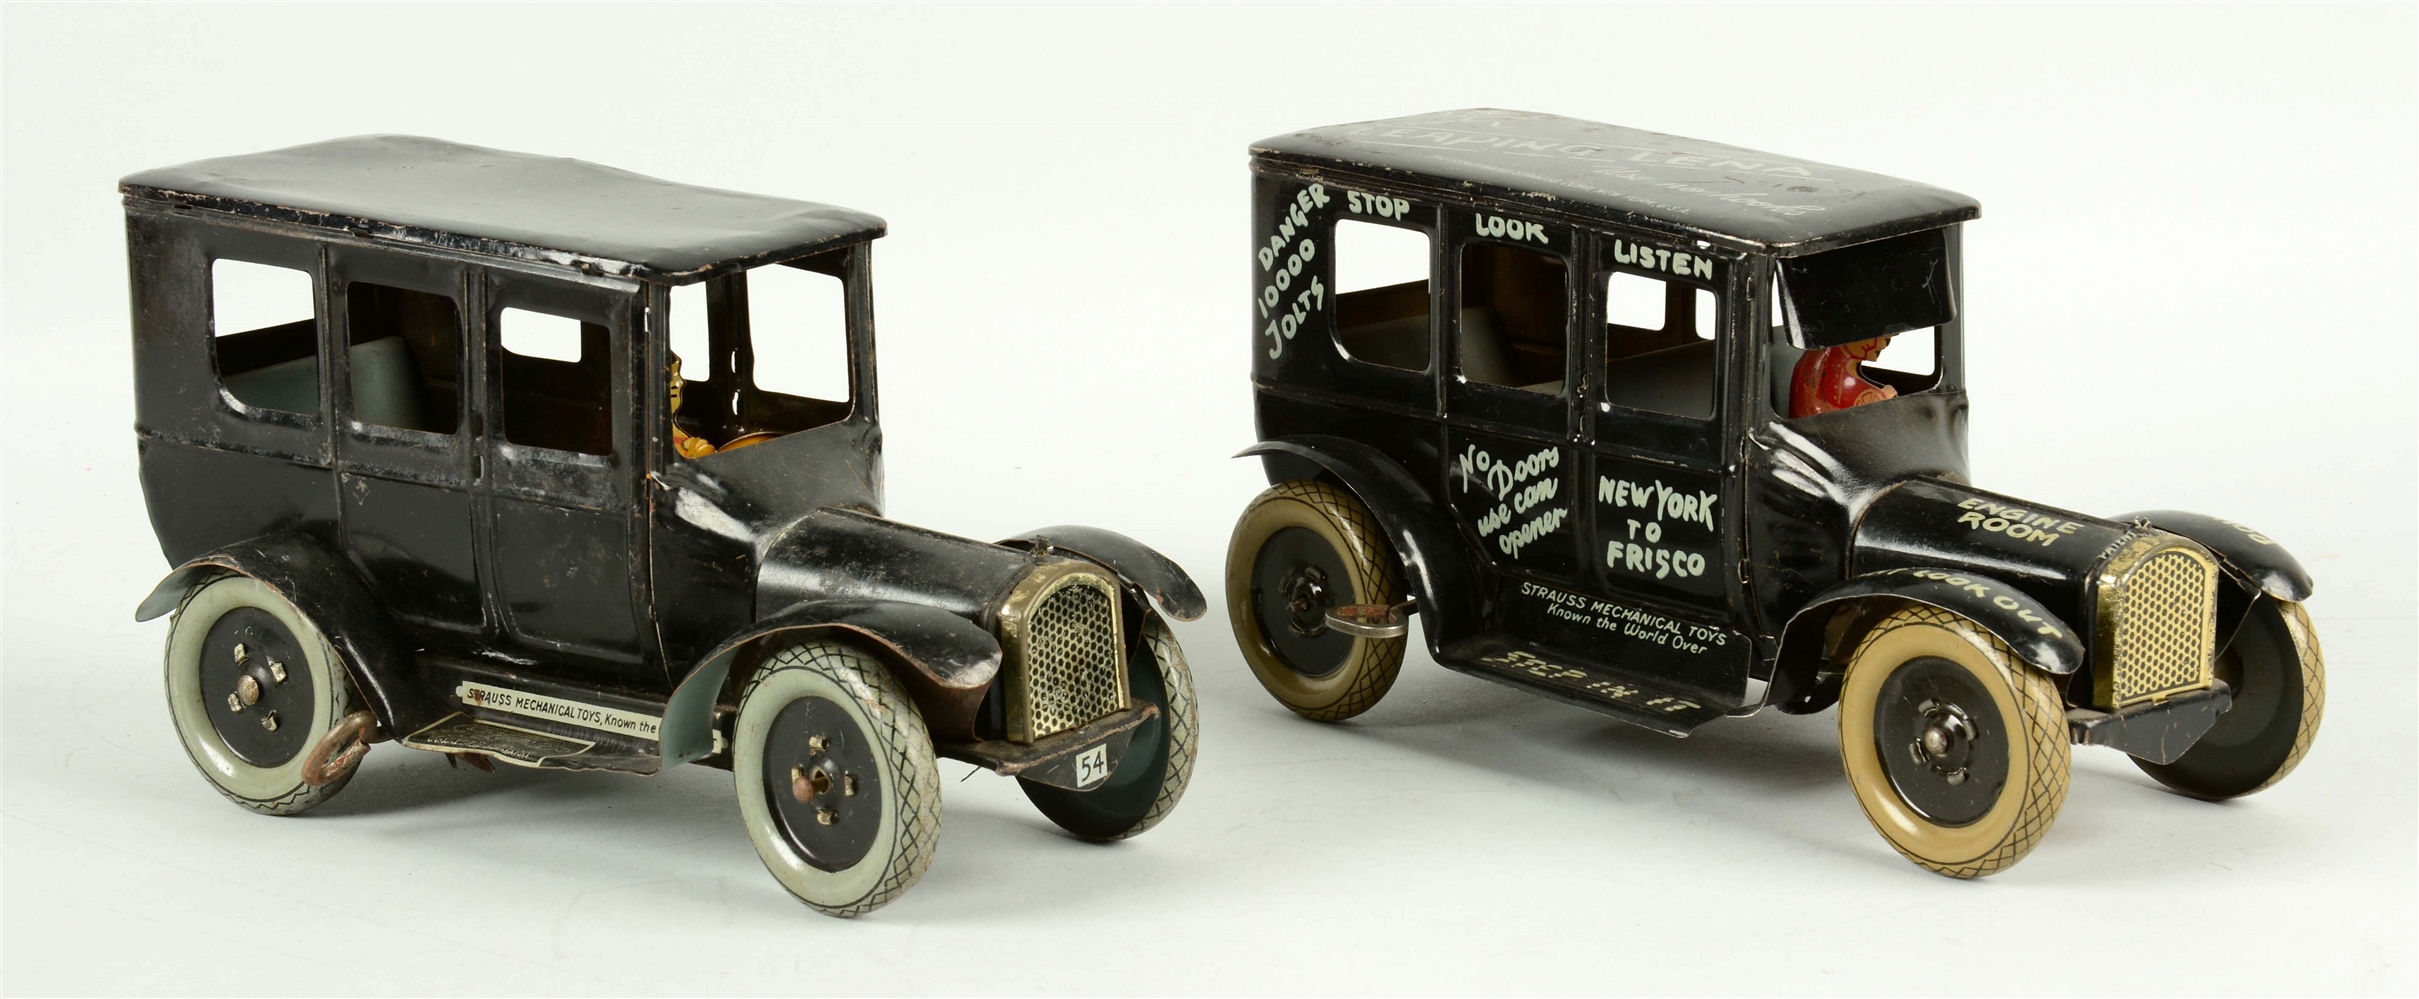 LOT OF 2: STRAUSS TIN LITHO WIND-UP AUTOMOBILE TOYS.